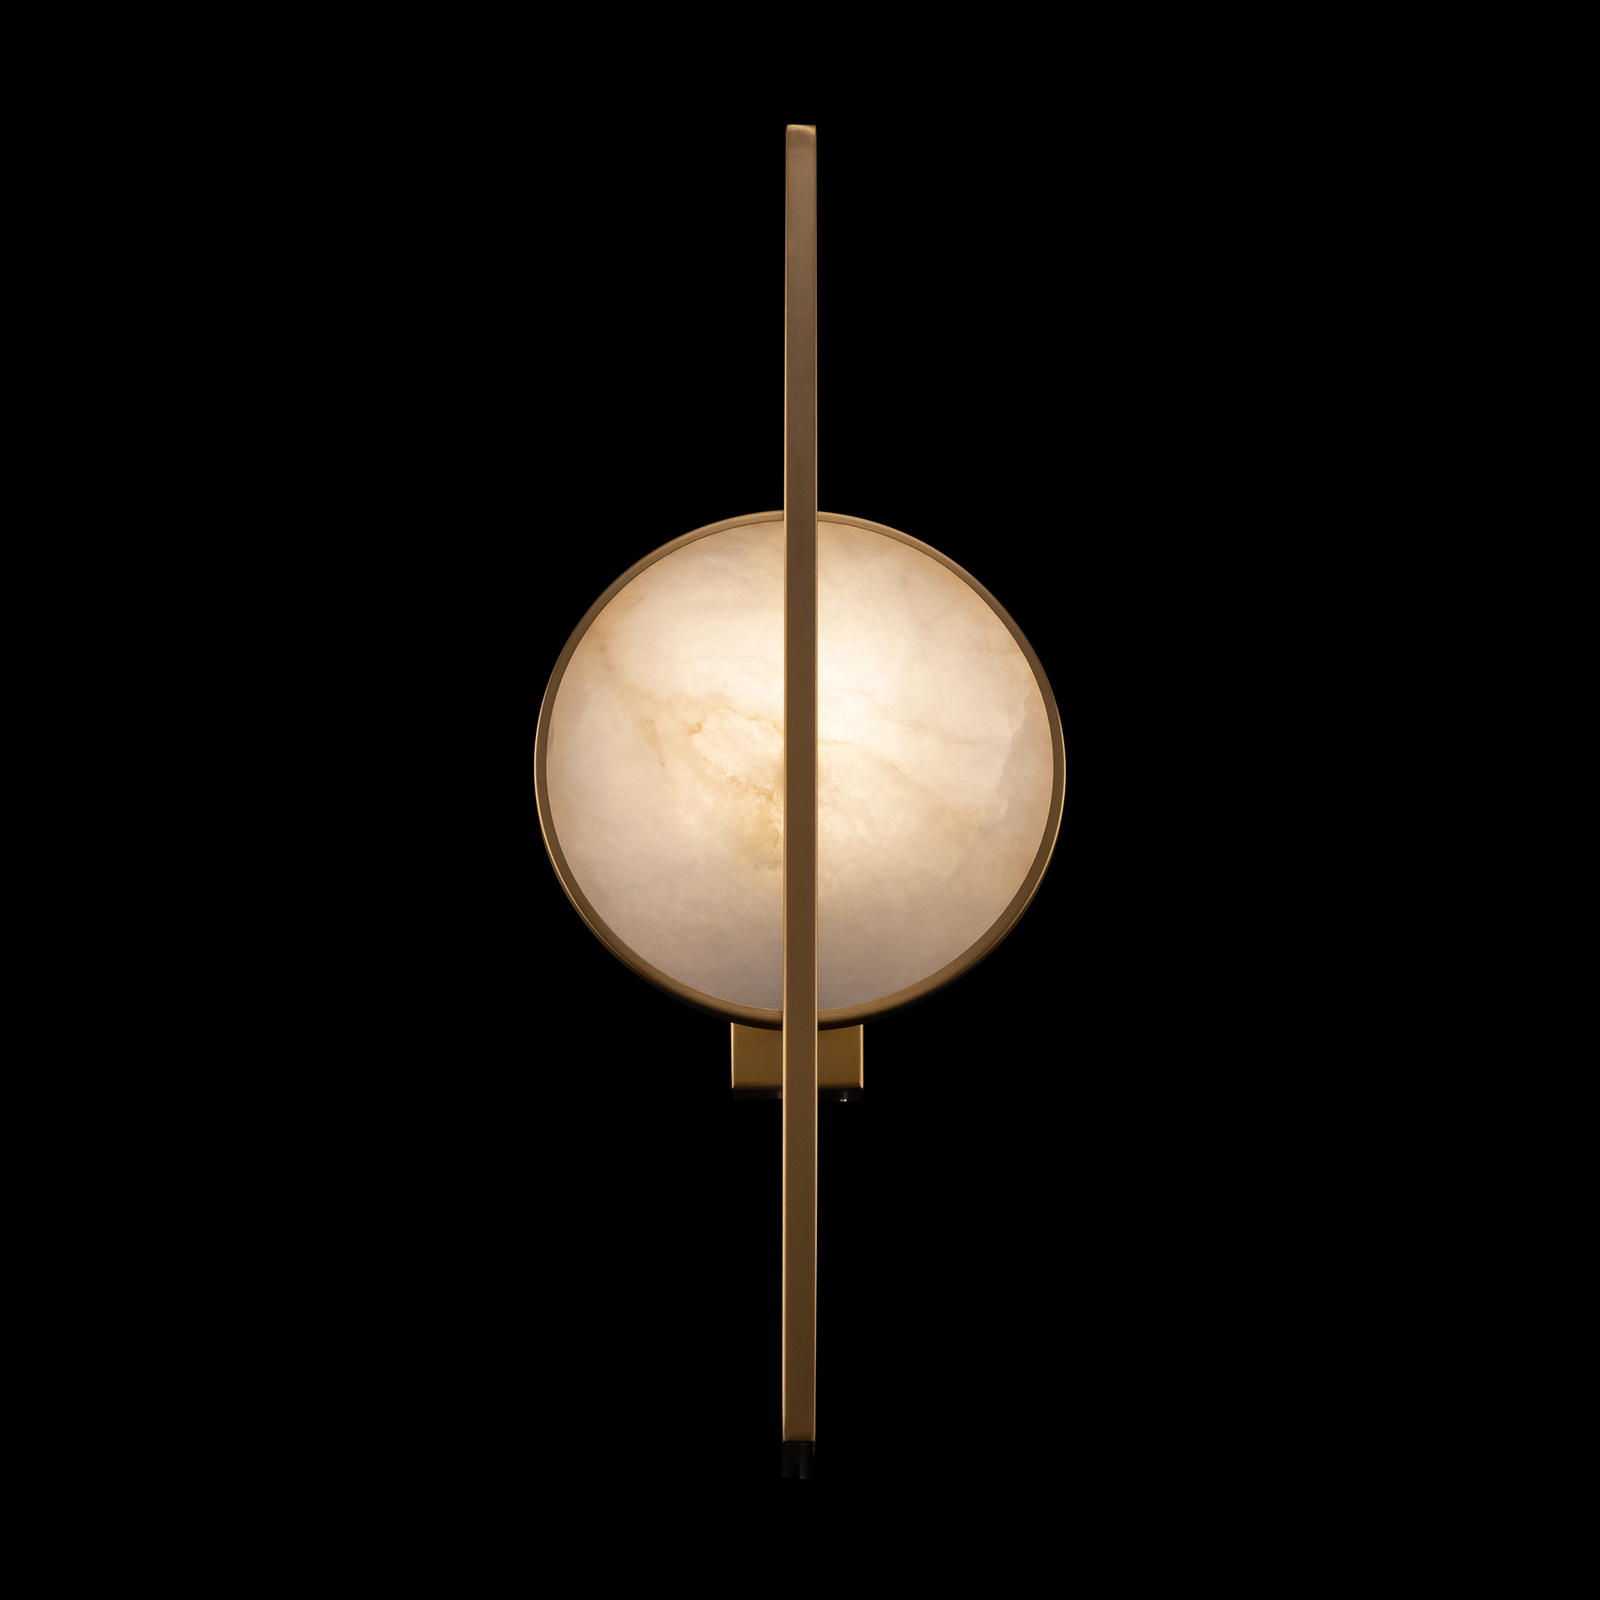 Maytoni Marmo wall light in gold with marble